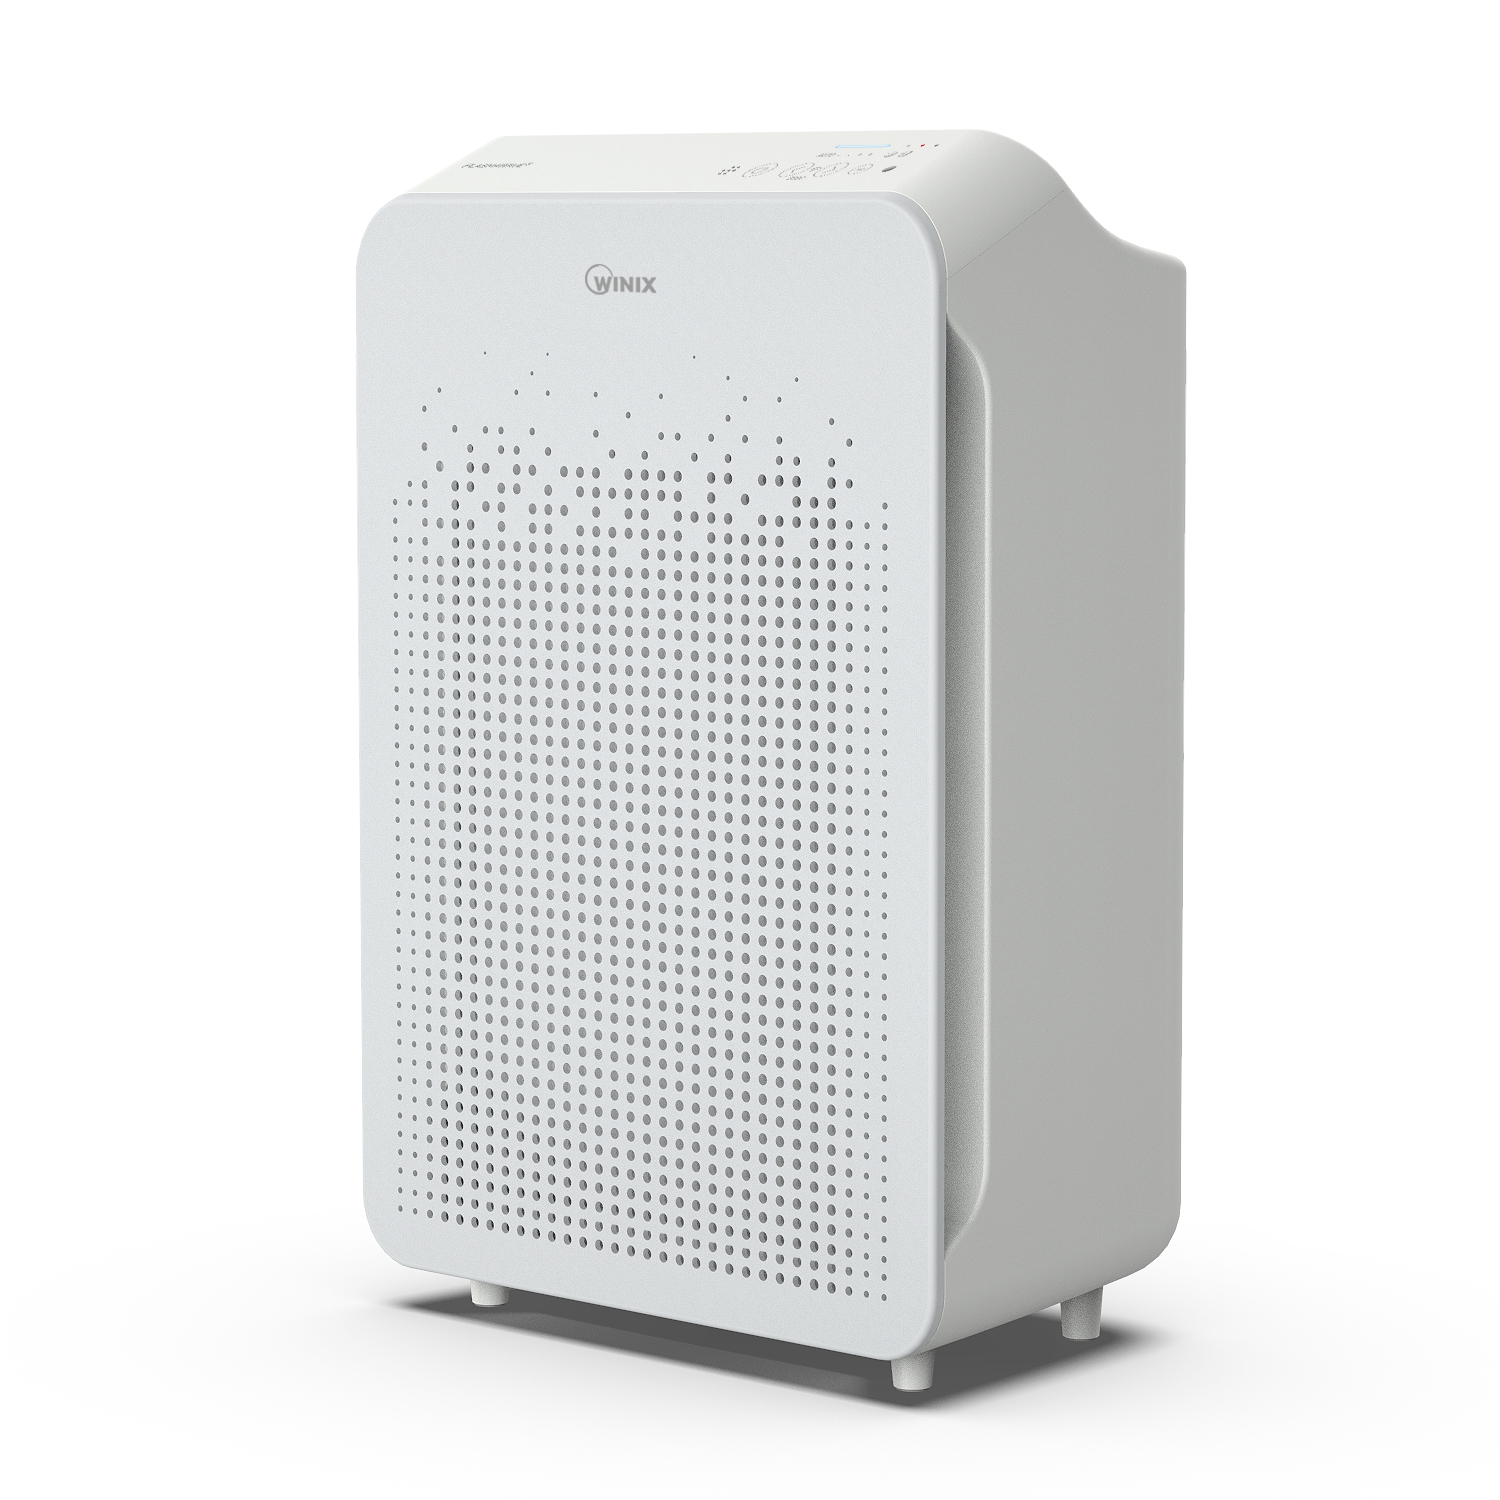 Winix C545 4-Stage True HEPA Air Purifier w/ WiFi (Factory Reconditioned) $64 + Free Shipping w/ Prime